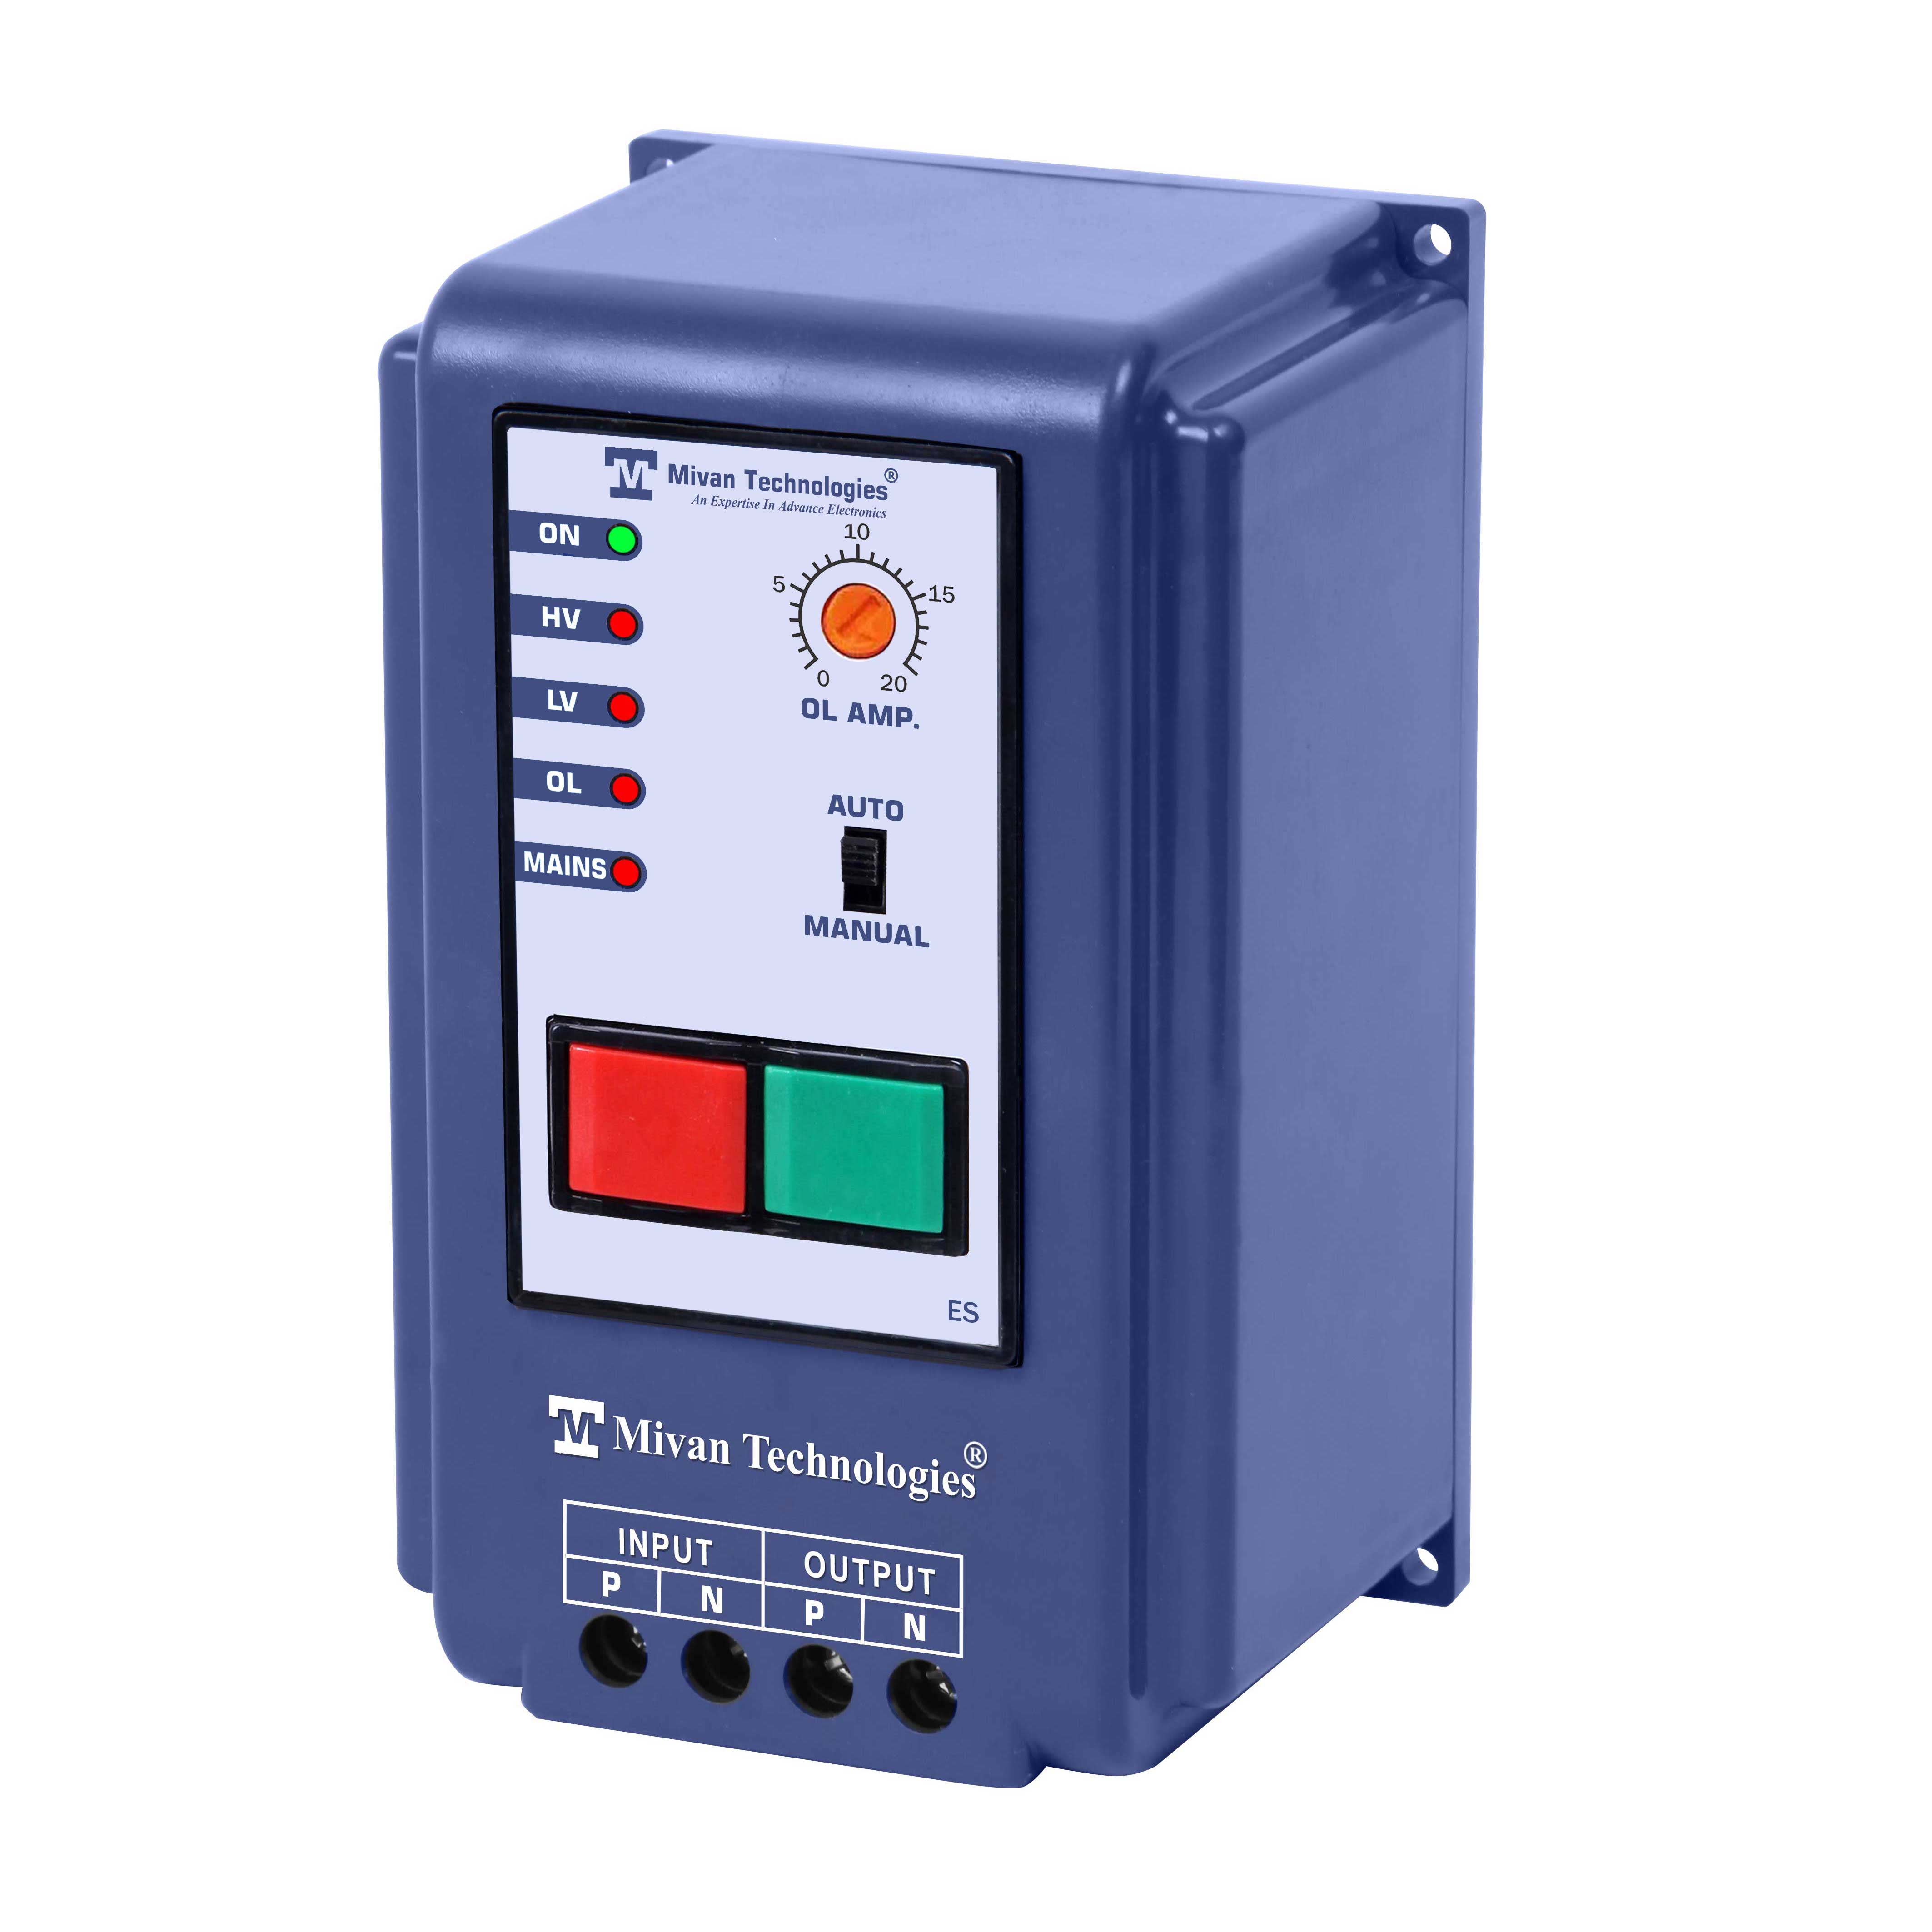 ES HD Single Phase motor starter  with high low voltage and overload protection suitable for all single phase appliances Suitable up to 3 hp motor